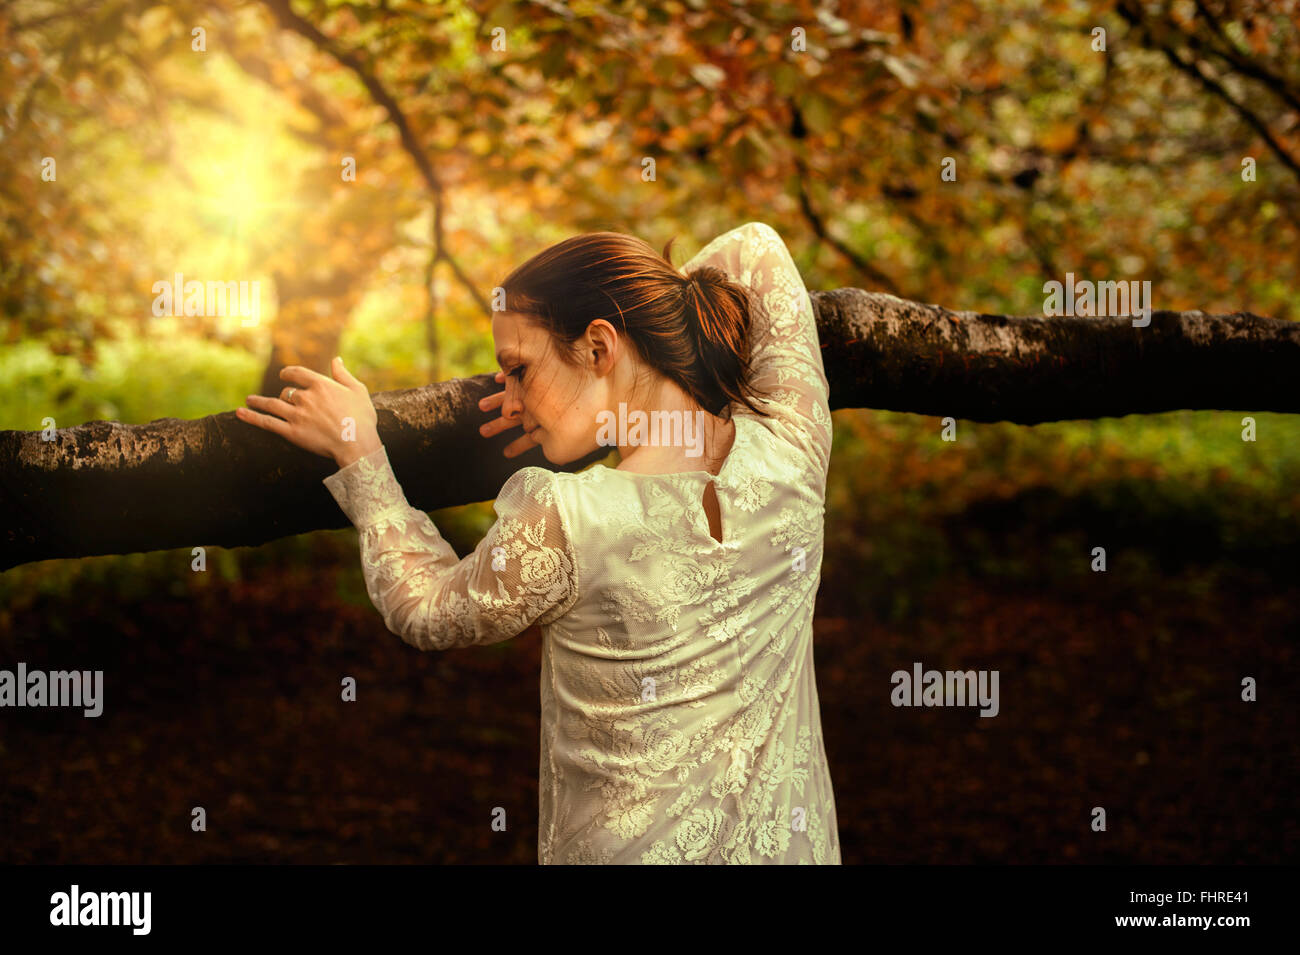 young woman in park leaning on tree branch Stock Photo